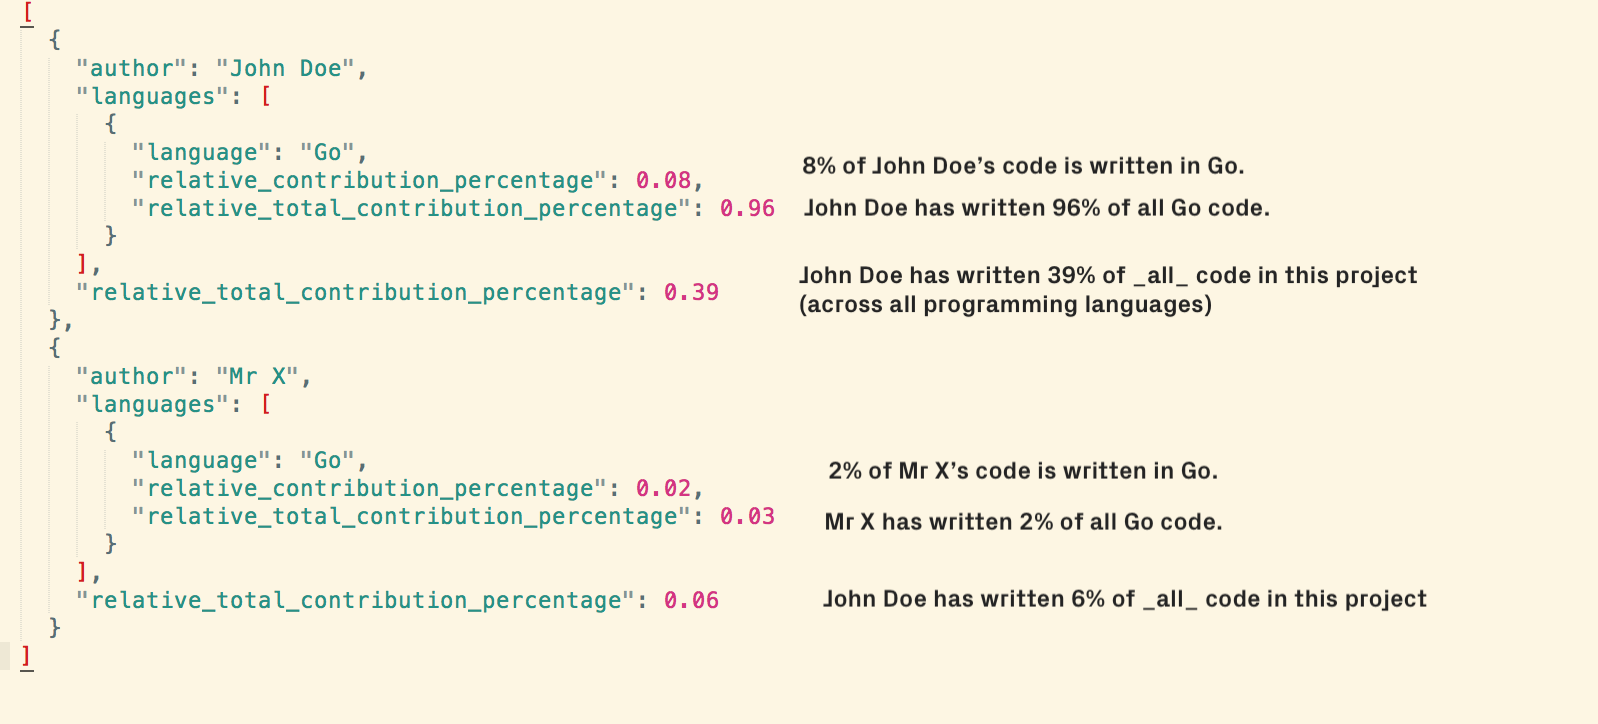 CodeScene calculates both total and relative contribution experience for each developer.